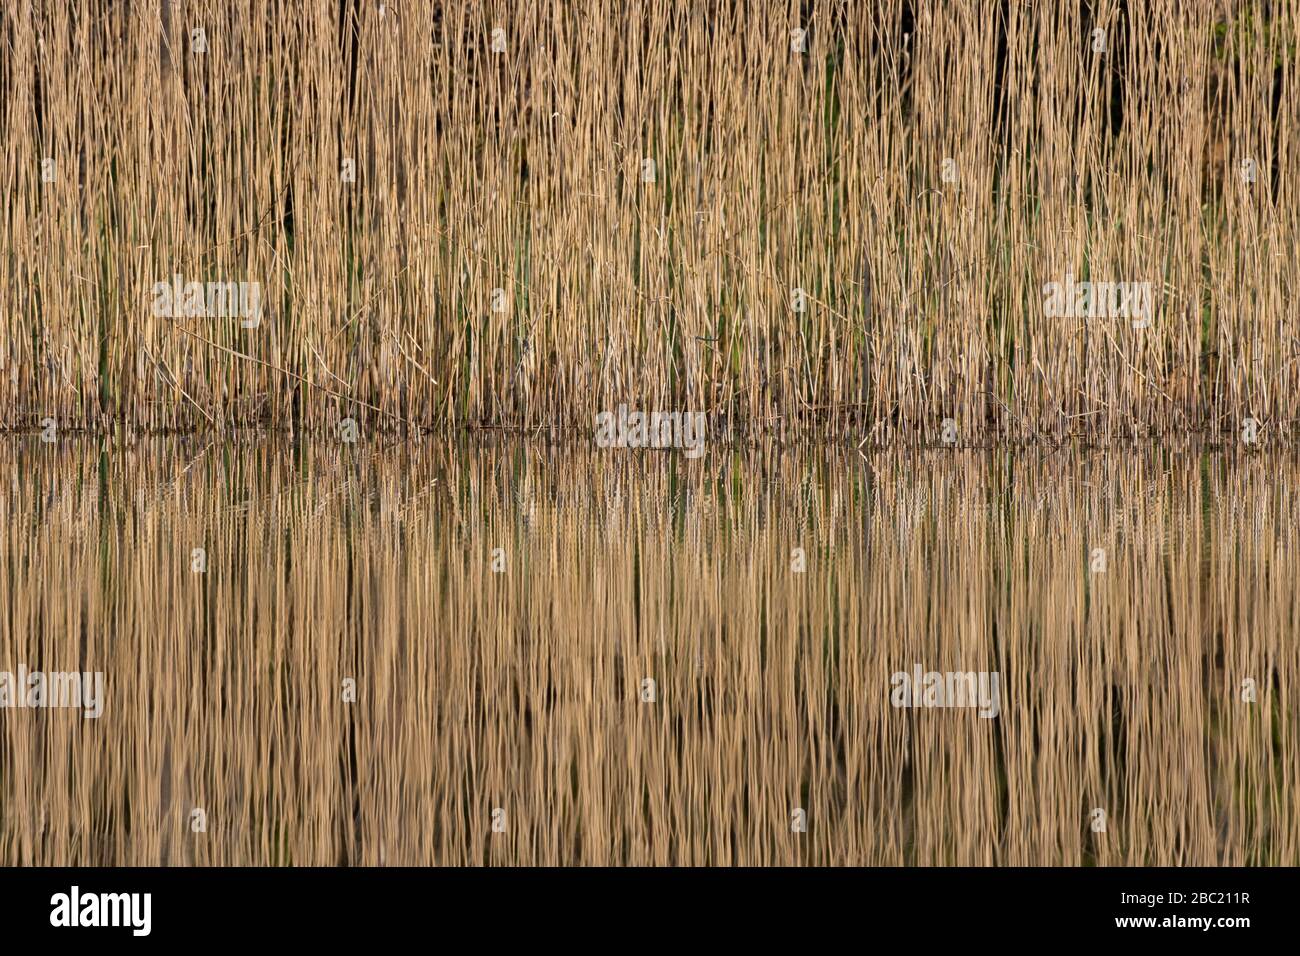 Reflection of common reed (Phragmites australis / Phragmites communis) in reedbed / reed bed reflected in water of pond / lake in winter Stock Photo